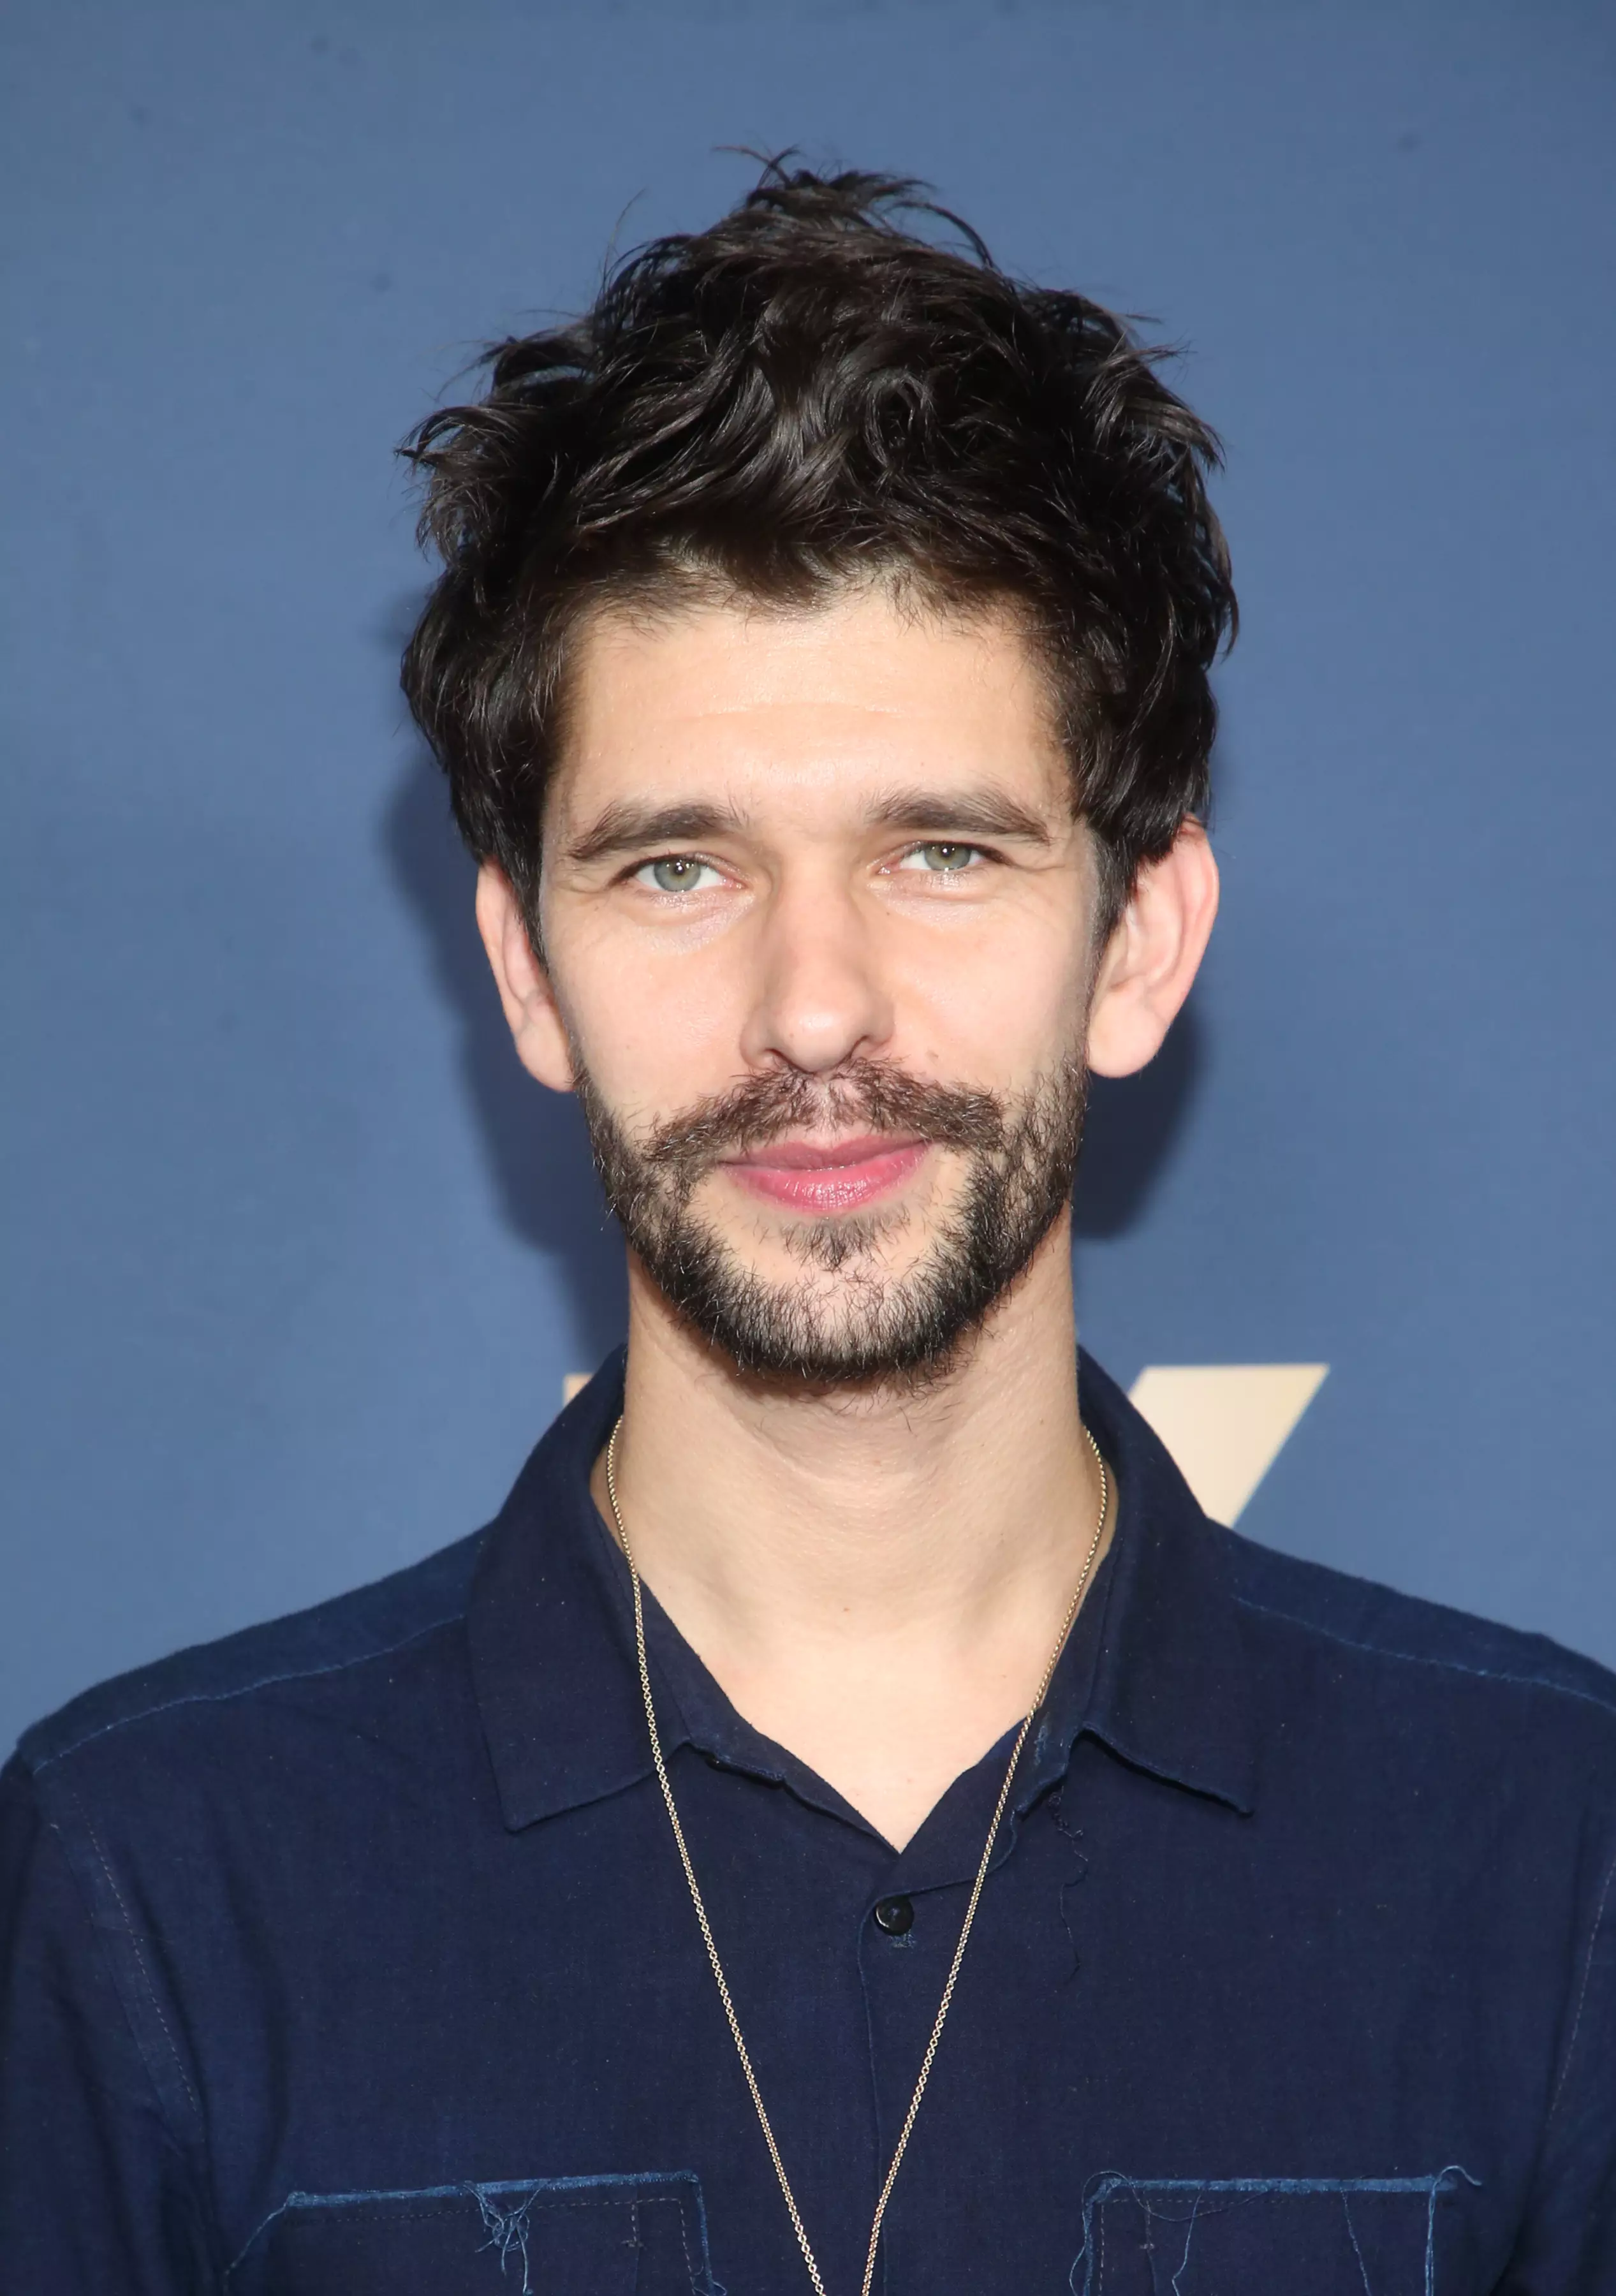 Ben Whishaw stars as the doctor (